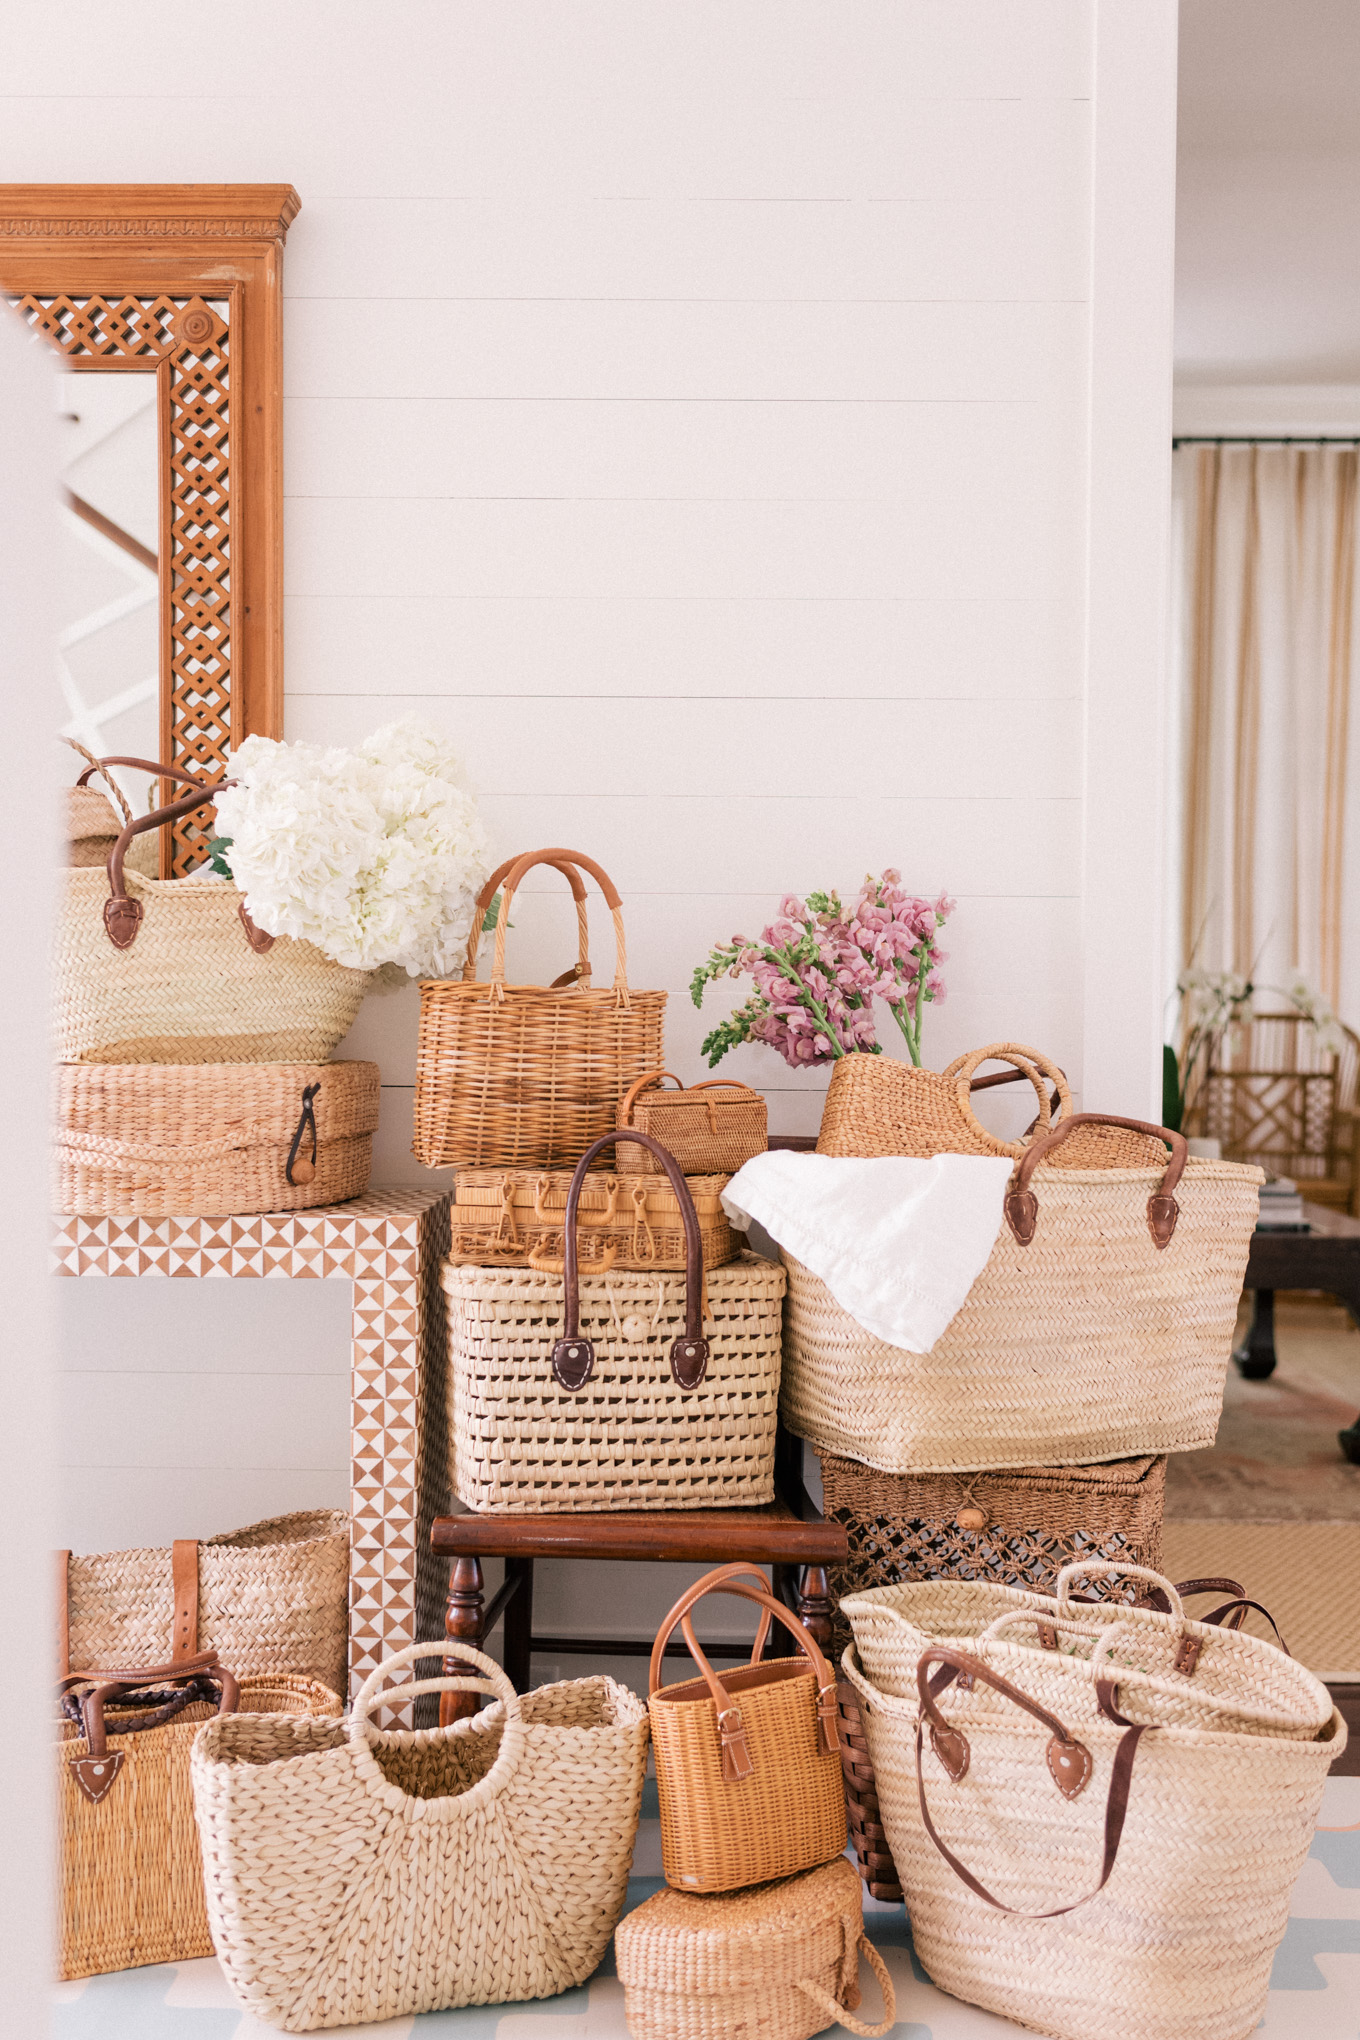 Beach Backpack Straw Picnic Basket With a Leather Fruit Basket